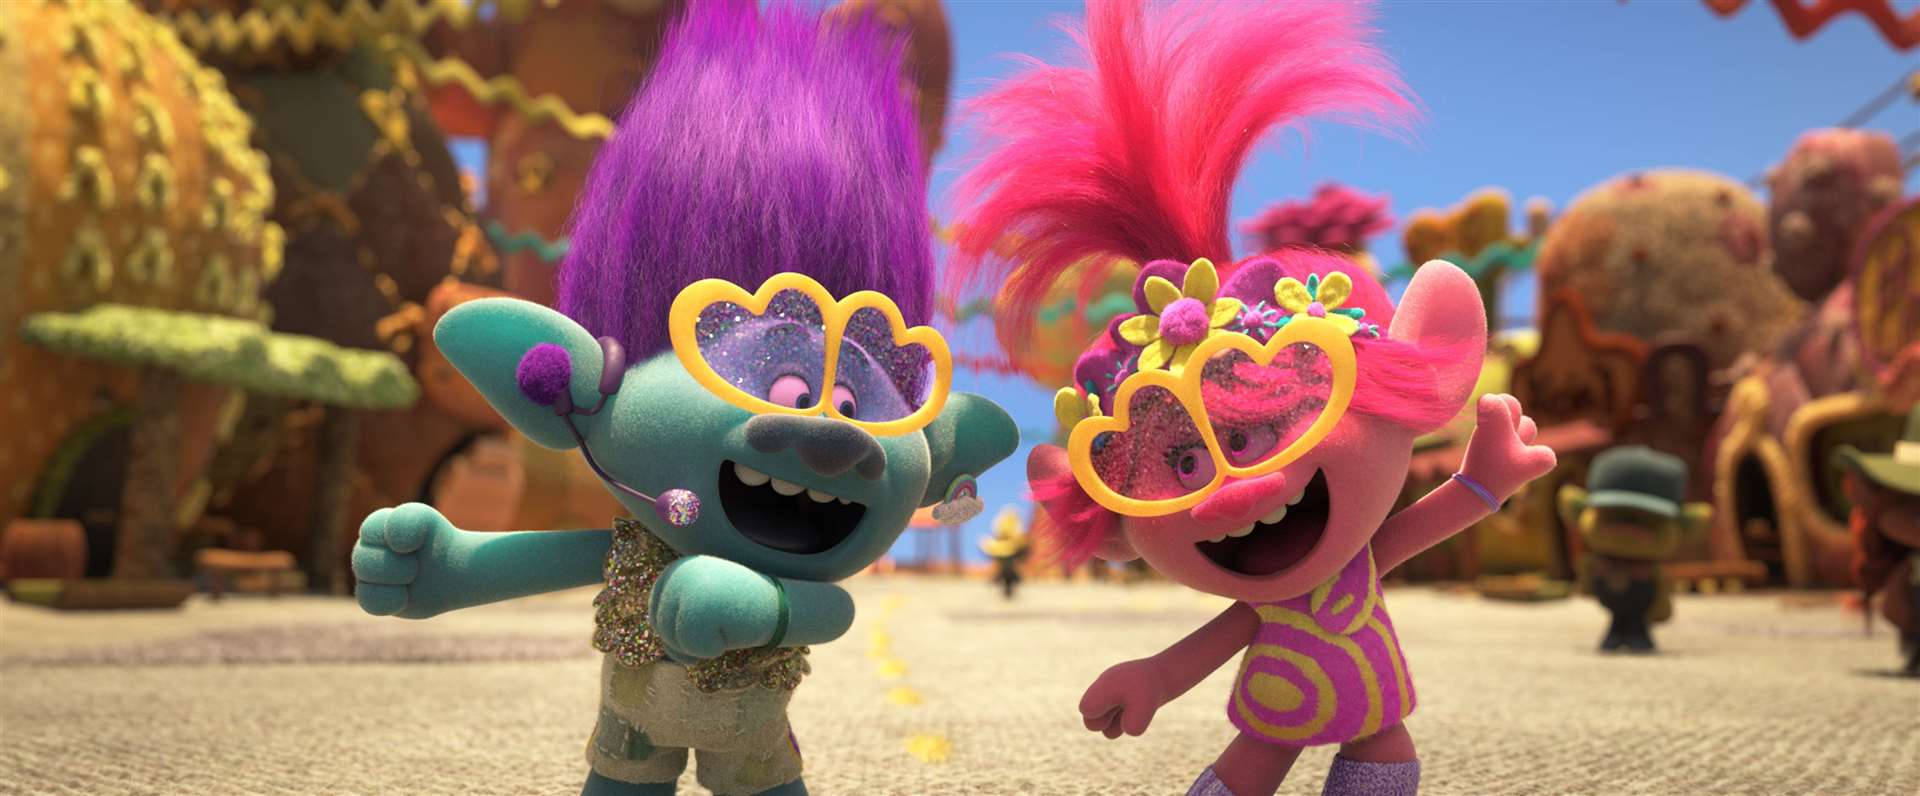 Trolls World Tour is being shown in Canterbury this weekend. Picture credit: PA Photo/DreamWorks Animation LLC./Universal Pictures. All Rights Reserved.